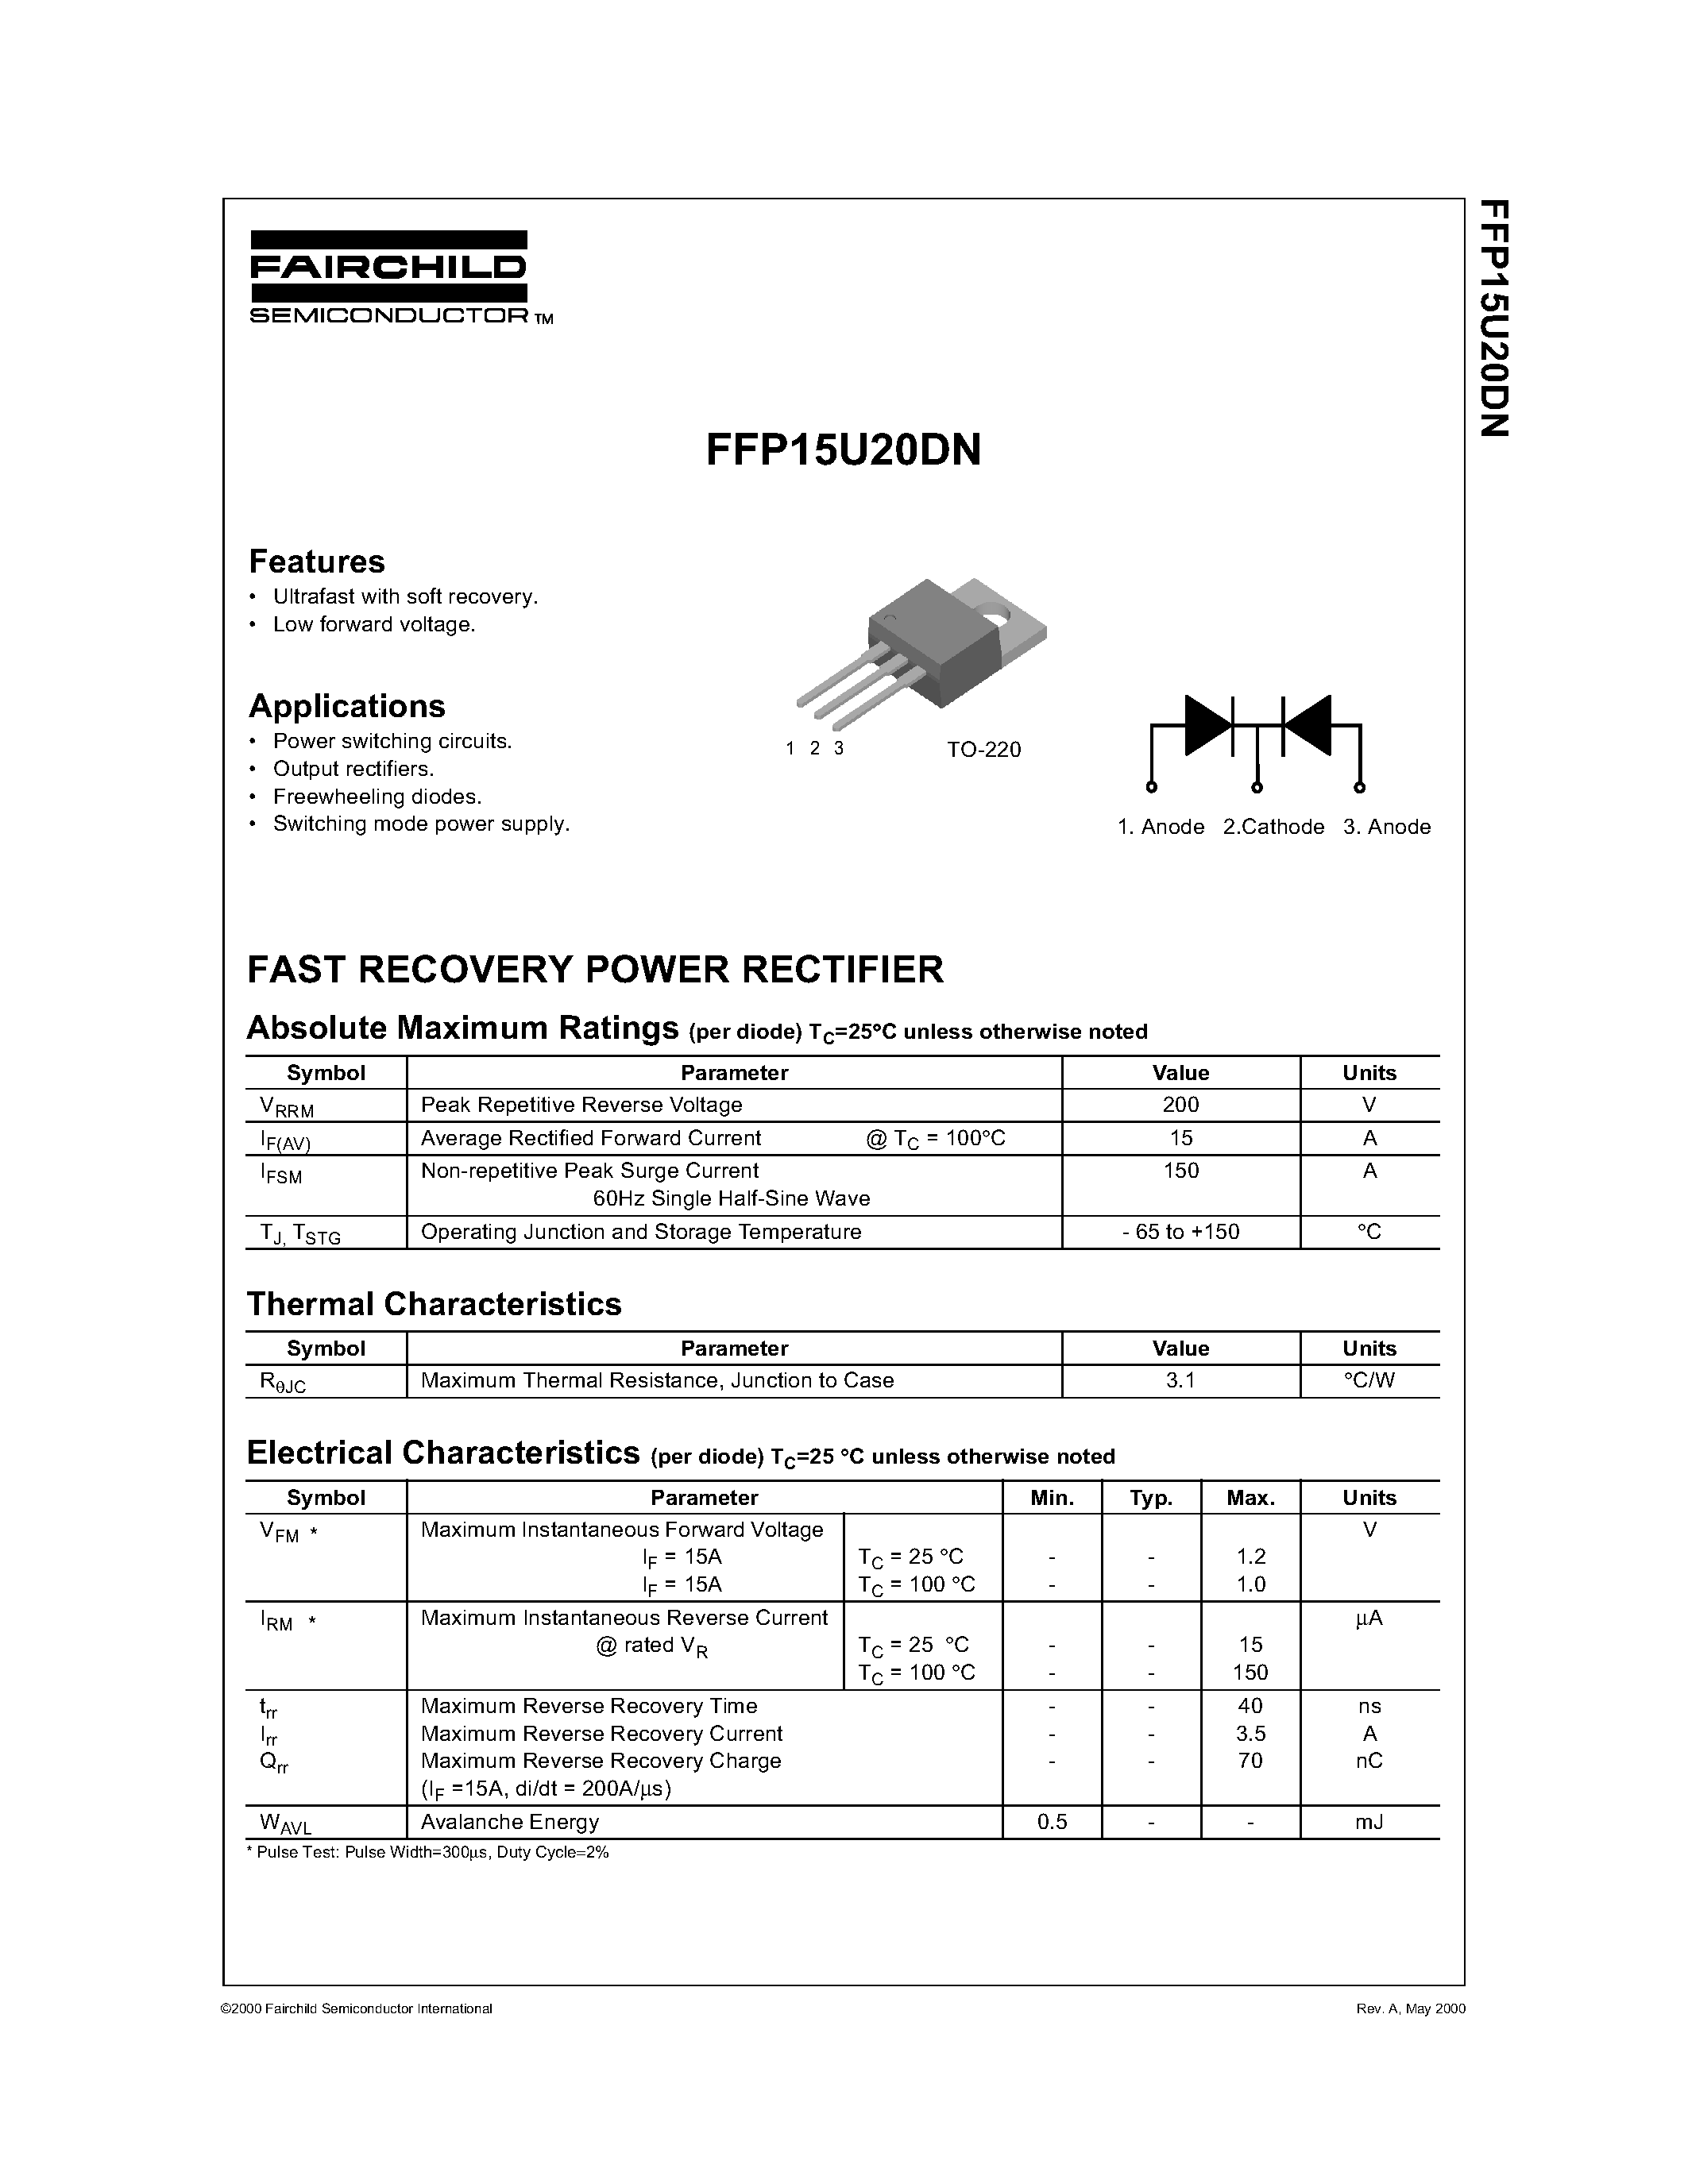 Datasheet FFP15U20DN - FAST RECOVERY POWER RECTIFIER page 1